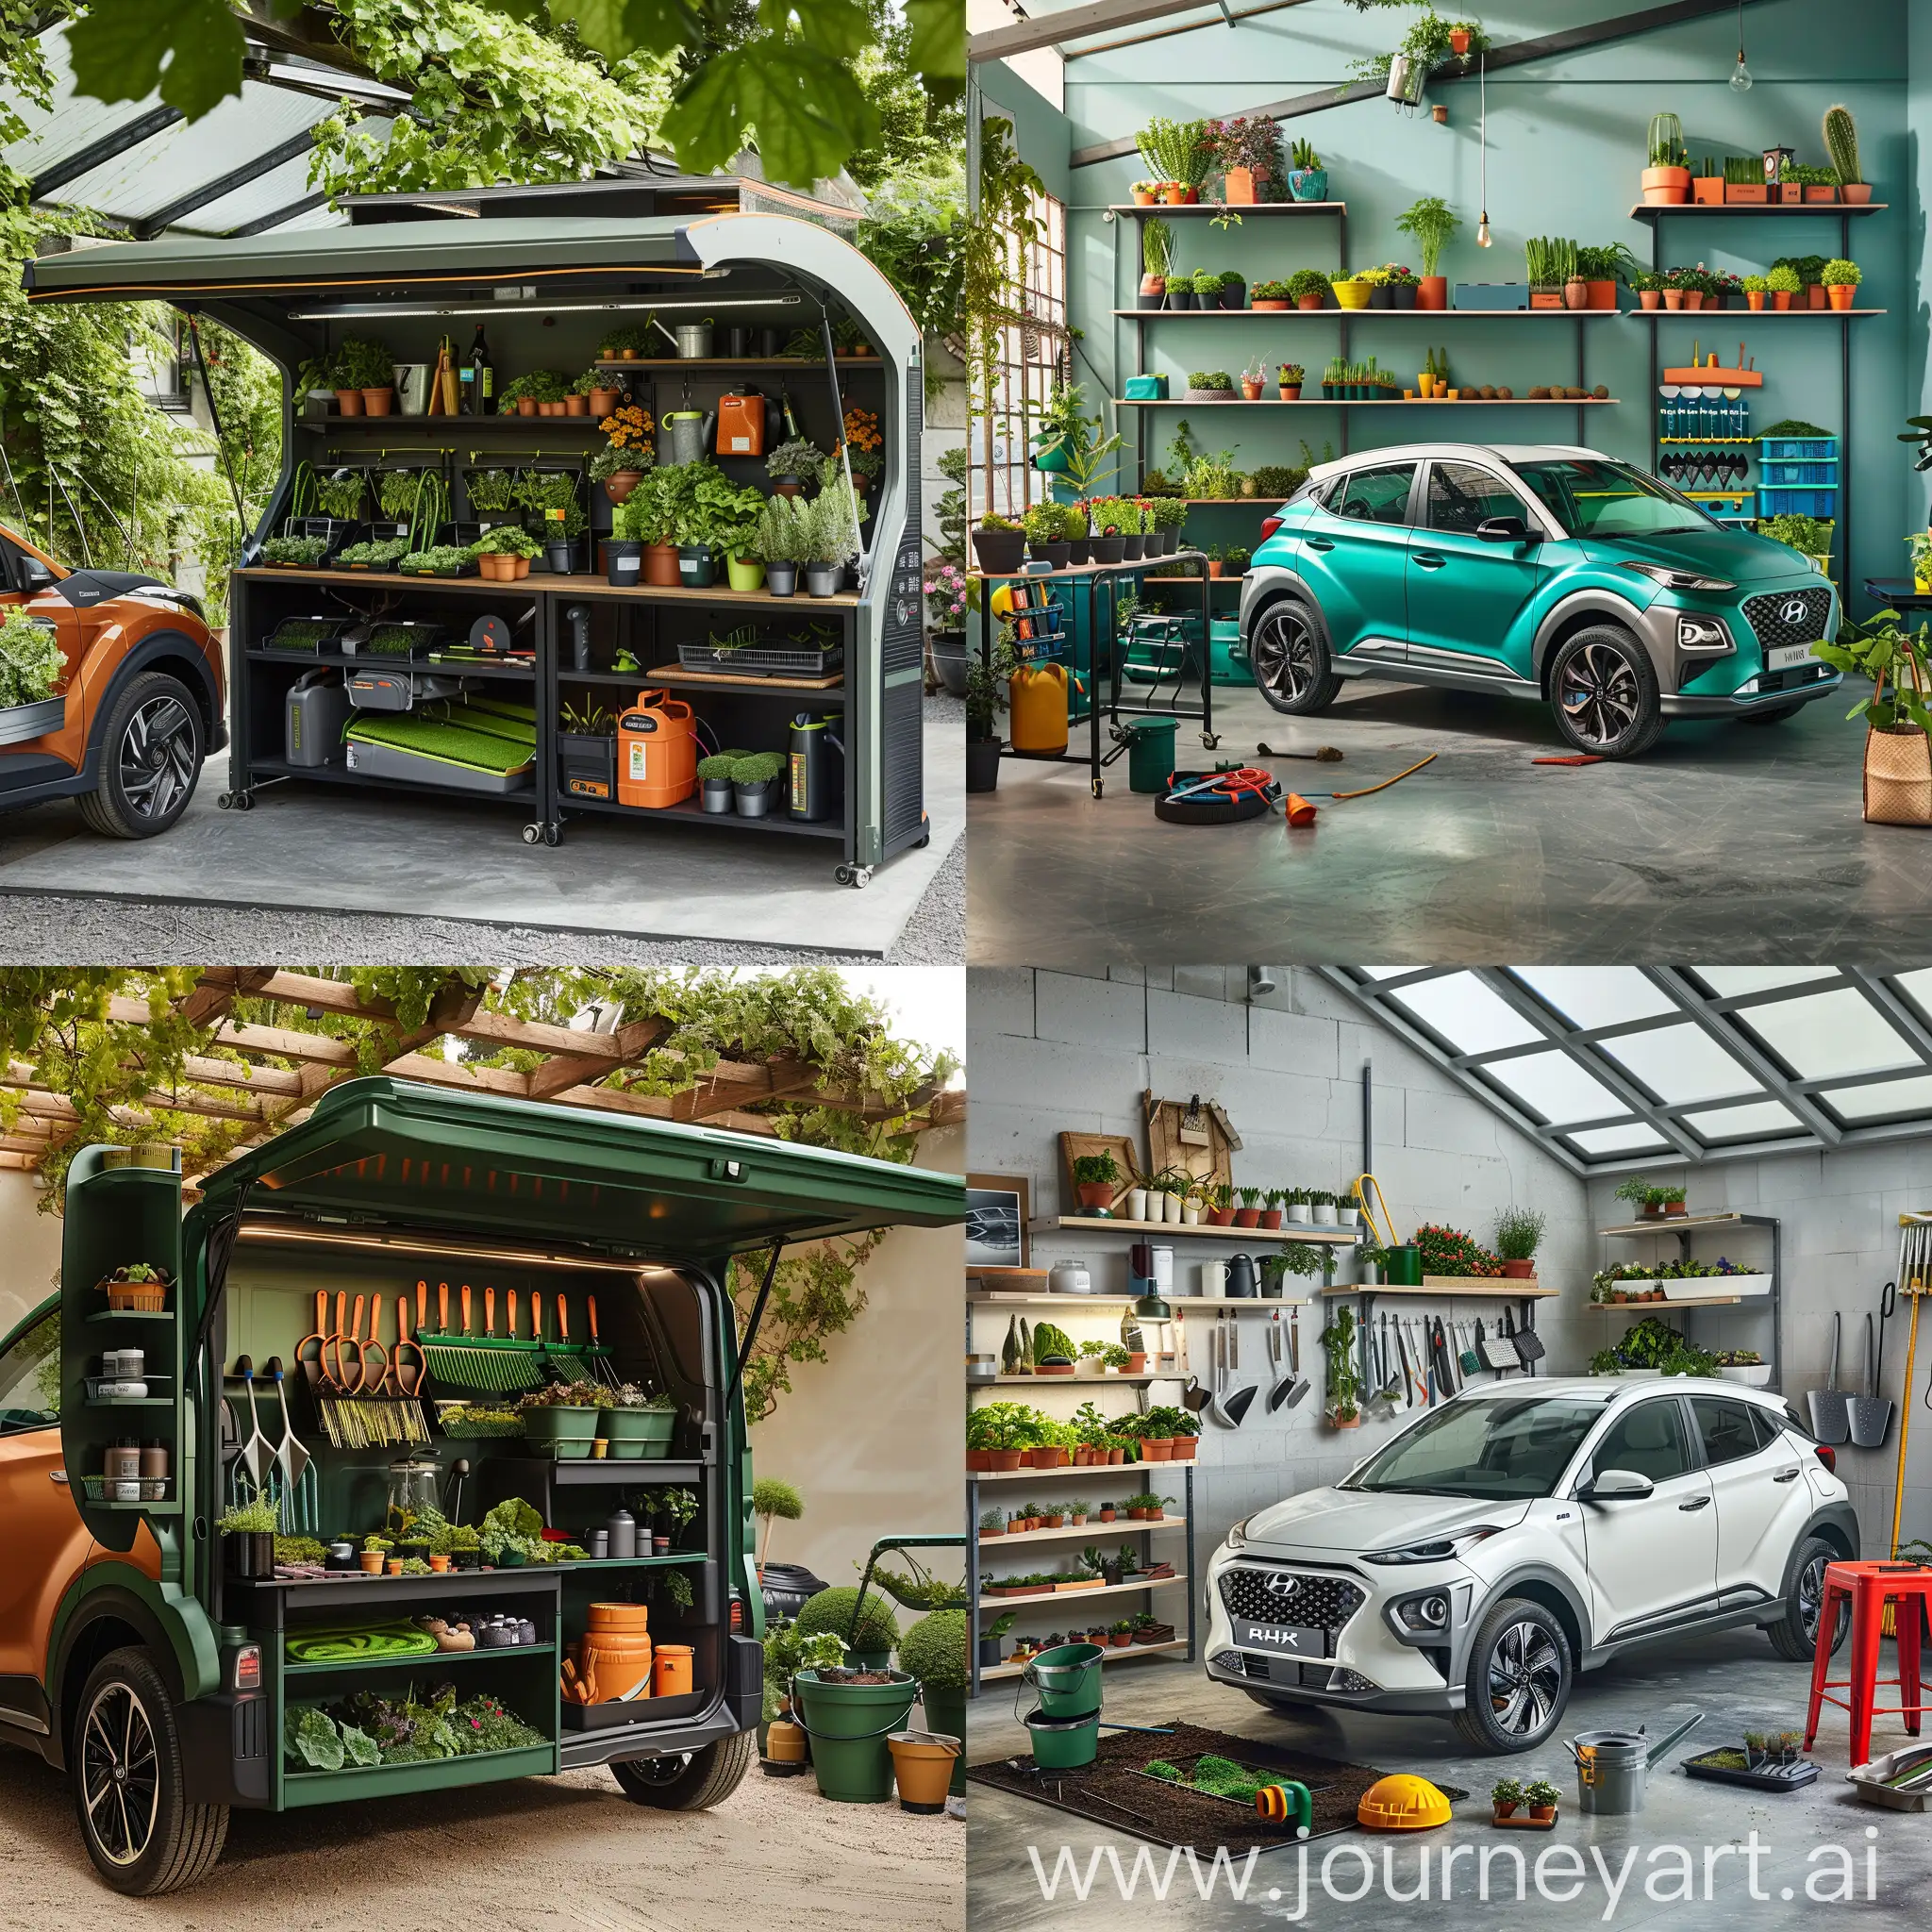 Hyundai HR with gardening workstation and equipment for amateur and professional gardening activities